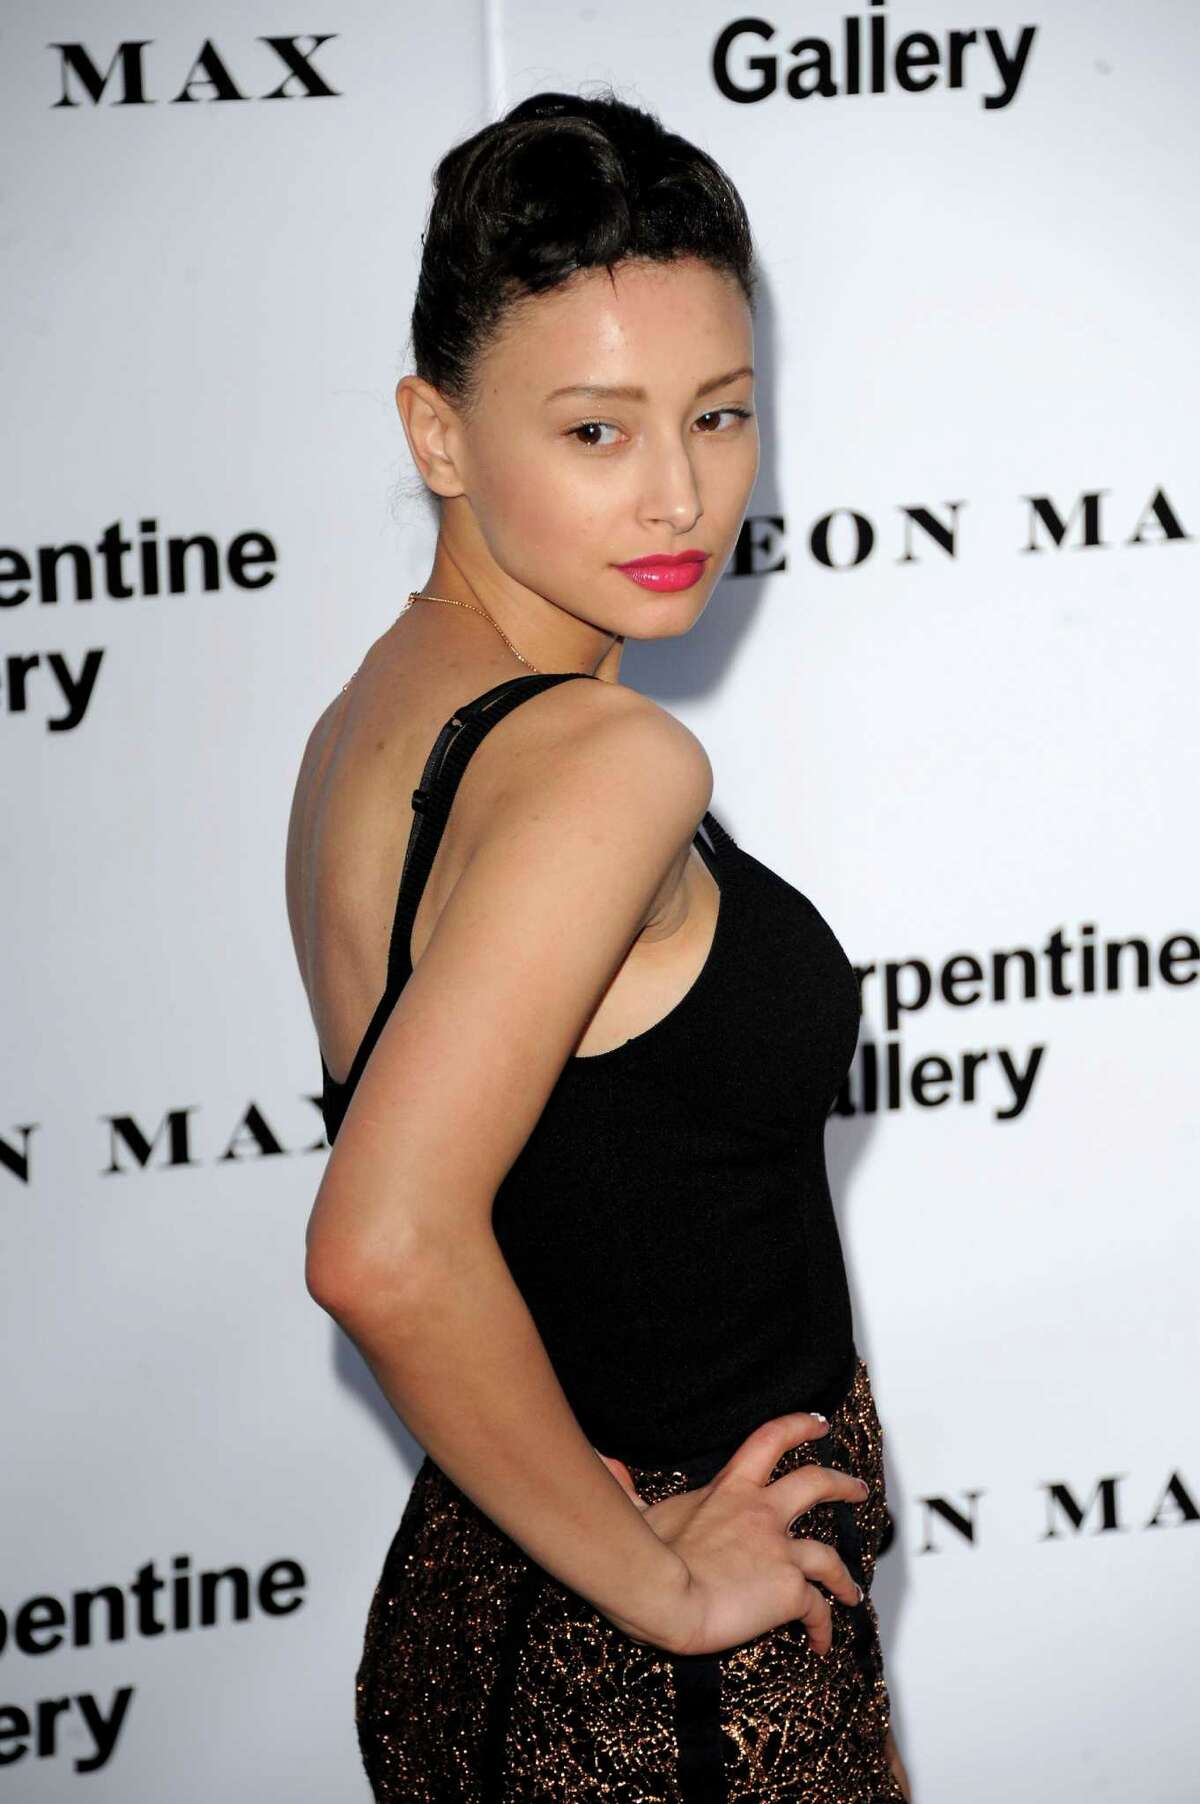 Leah Weller attends the Serpentine Gallery Summer Party at The Serpentine Gallery on June 26, 2012 in London, England.